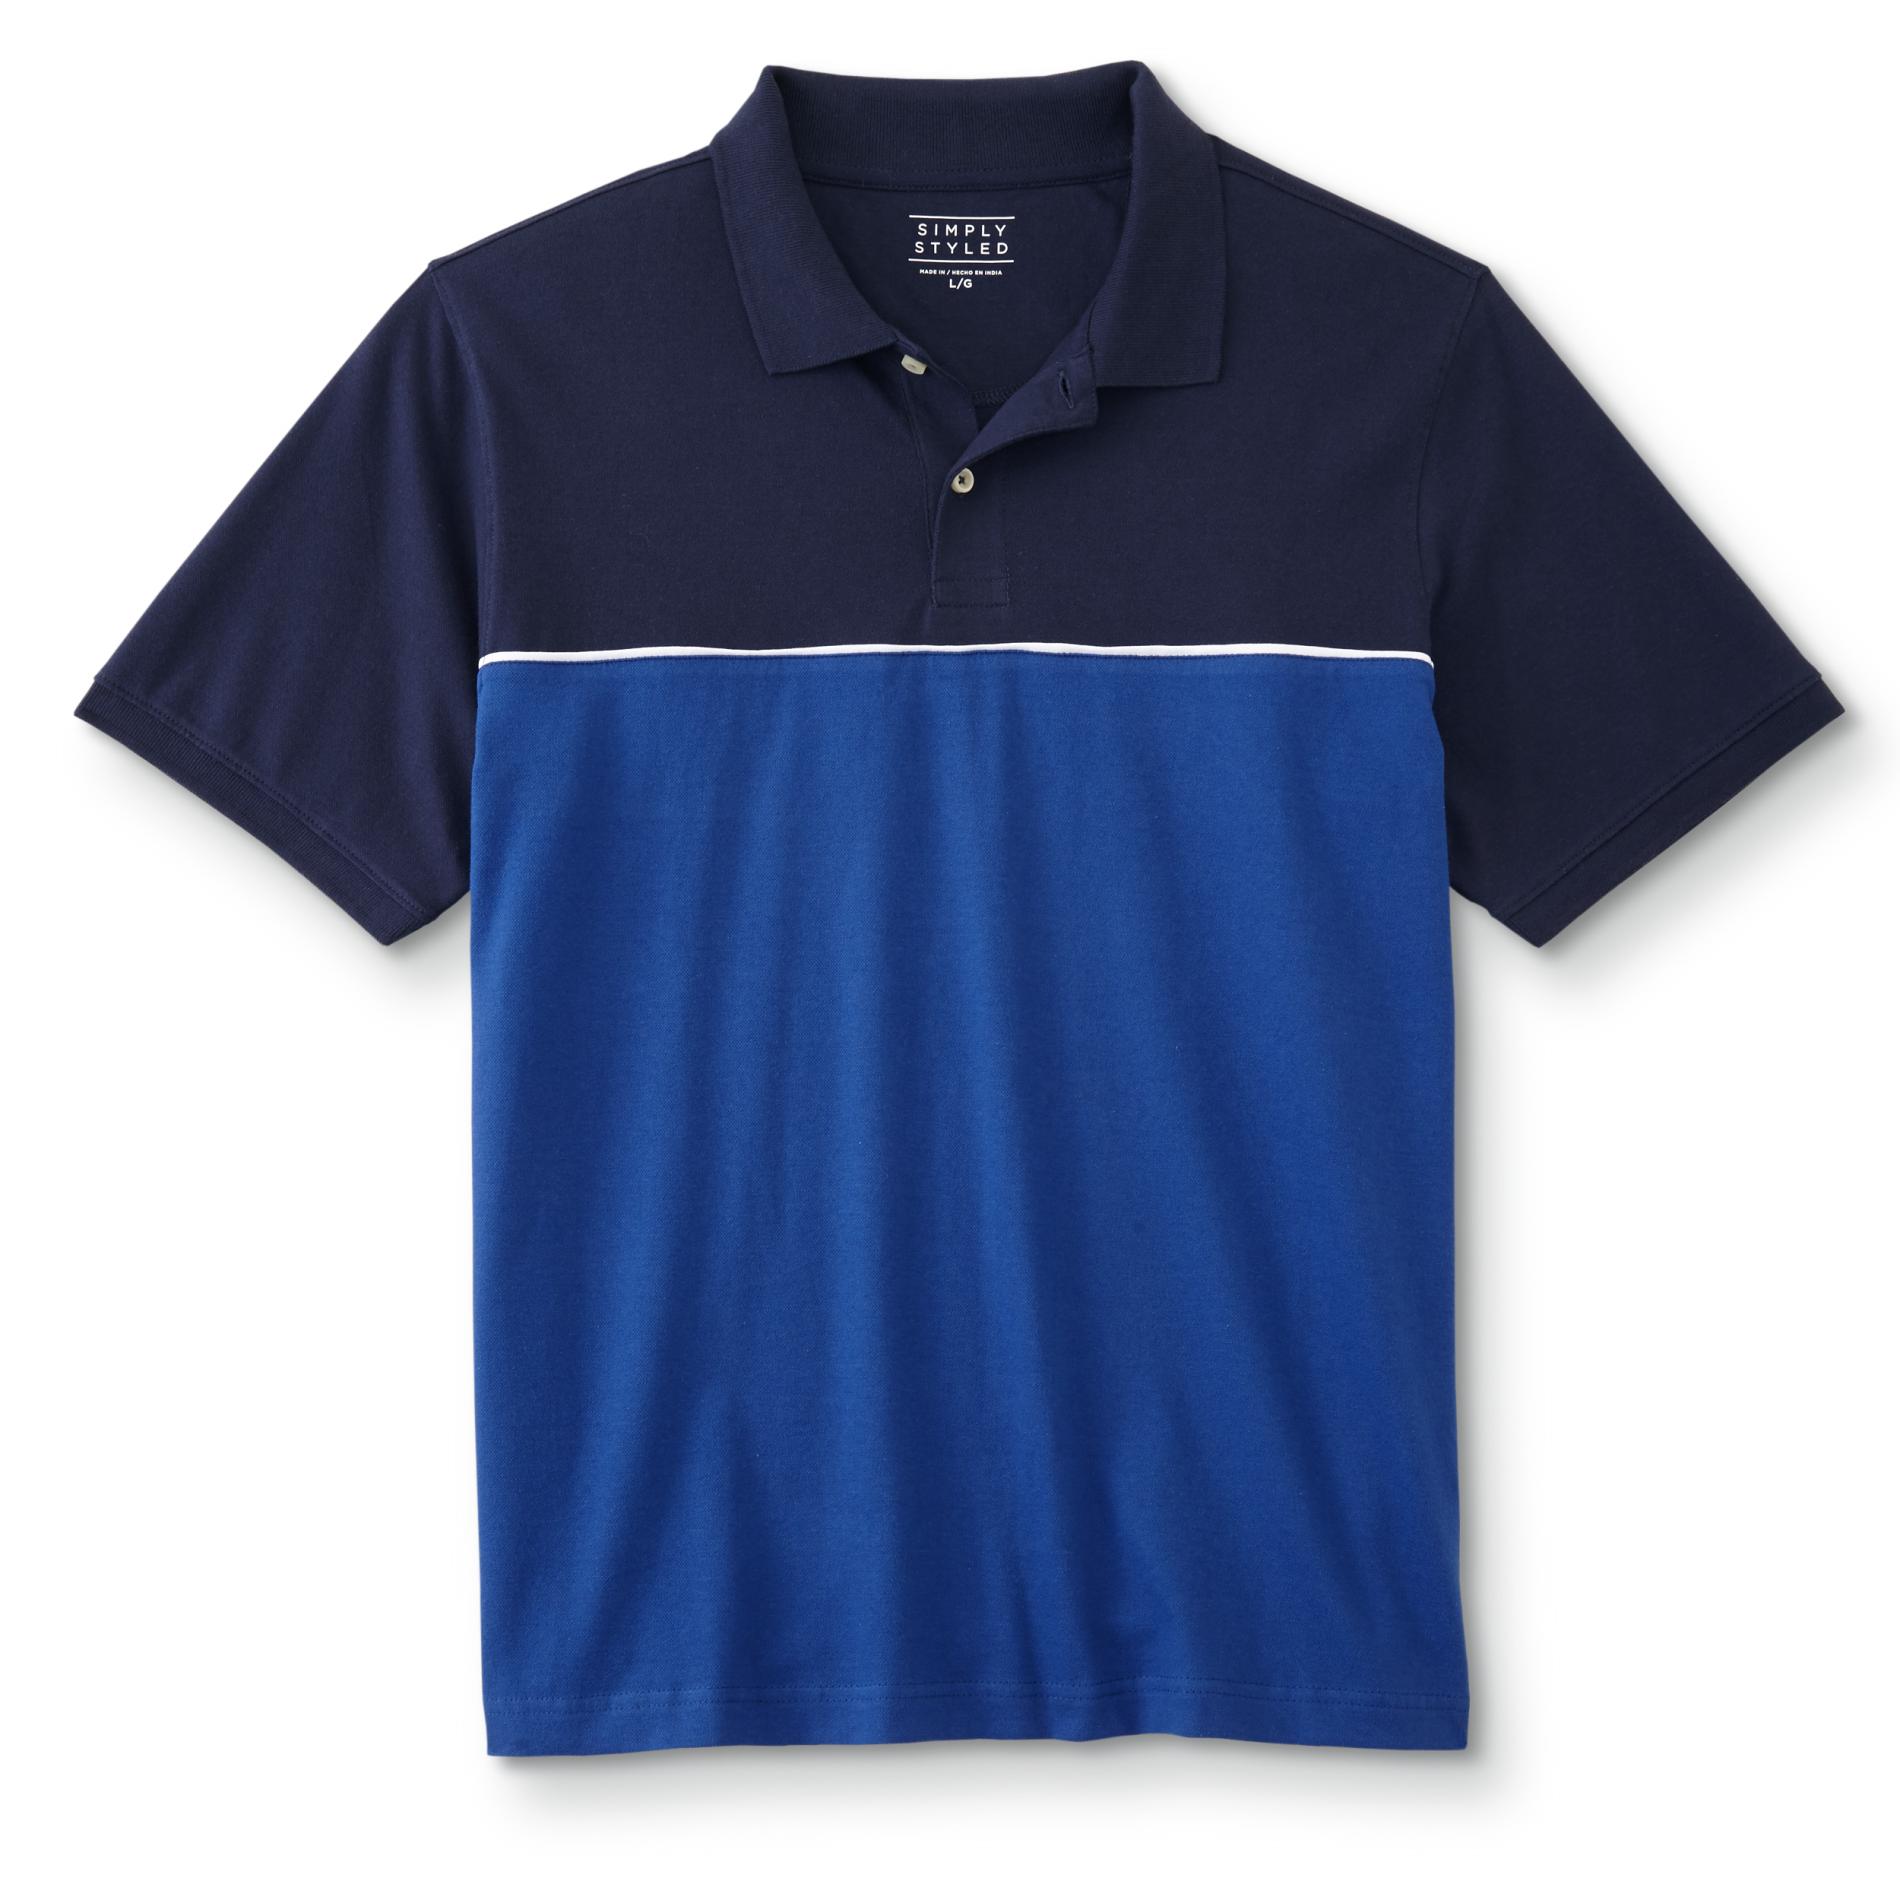 Simply Styled Men's Polo Shirt - Colorblock